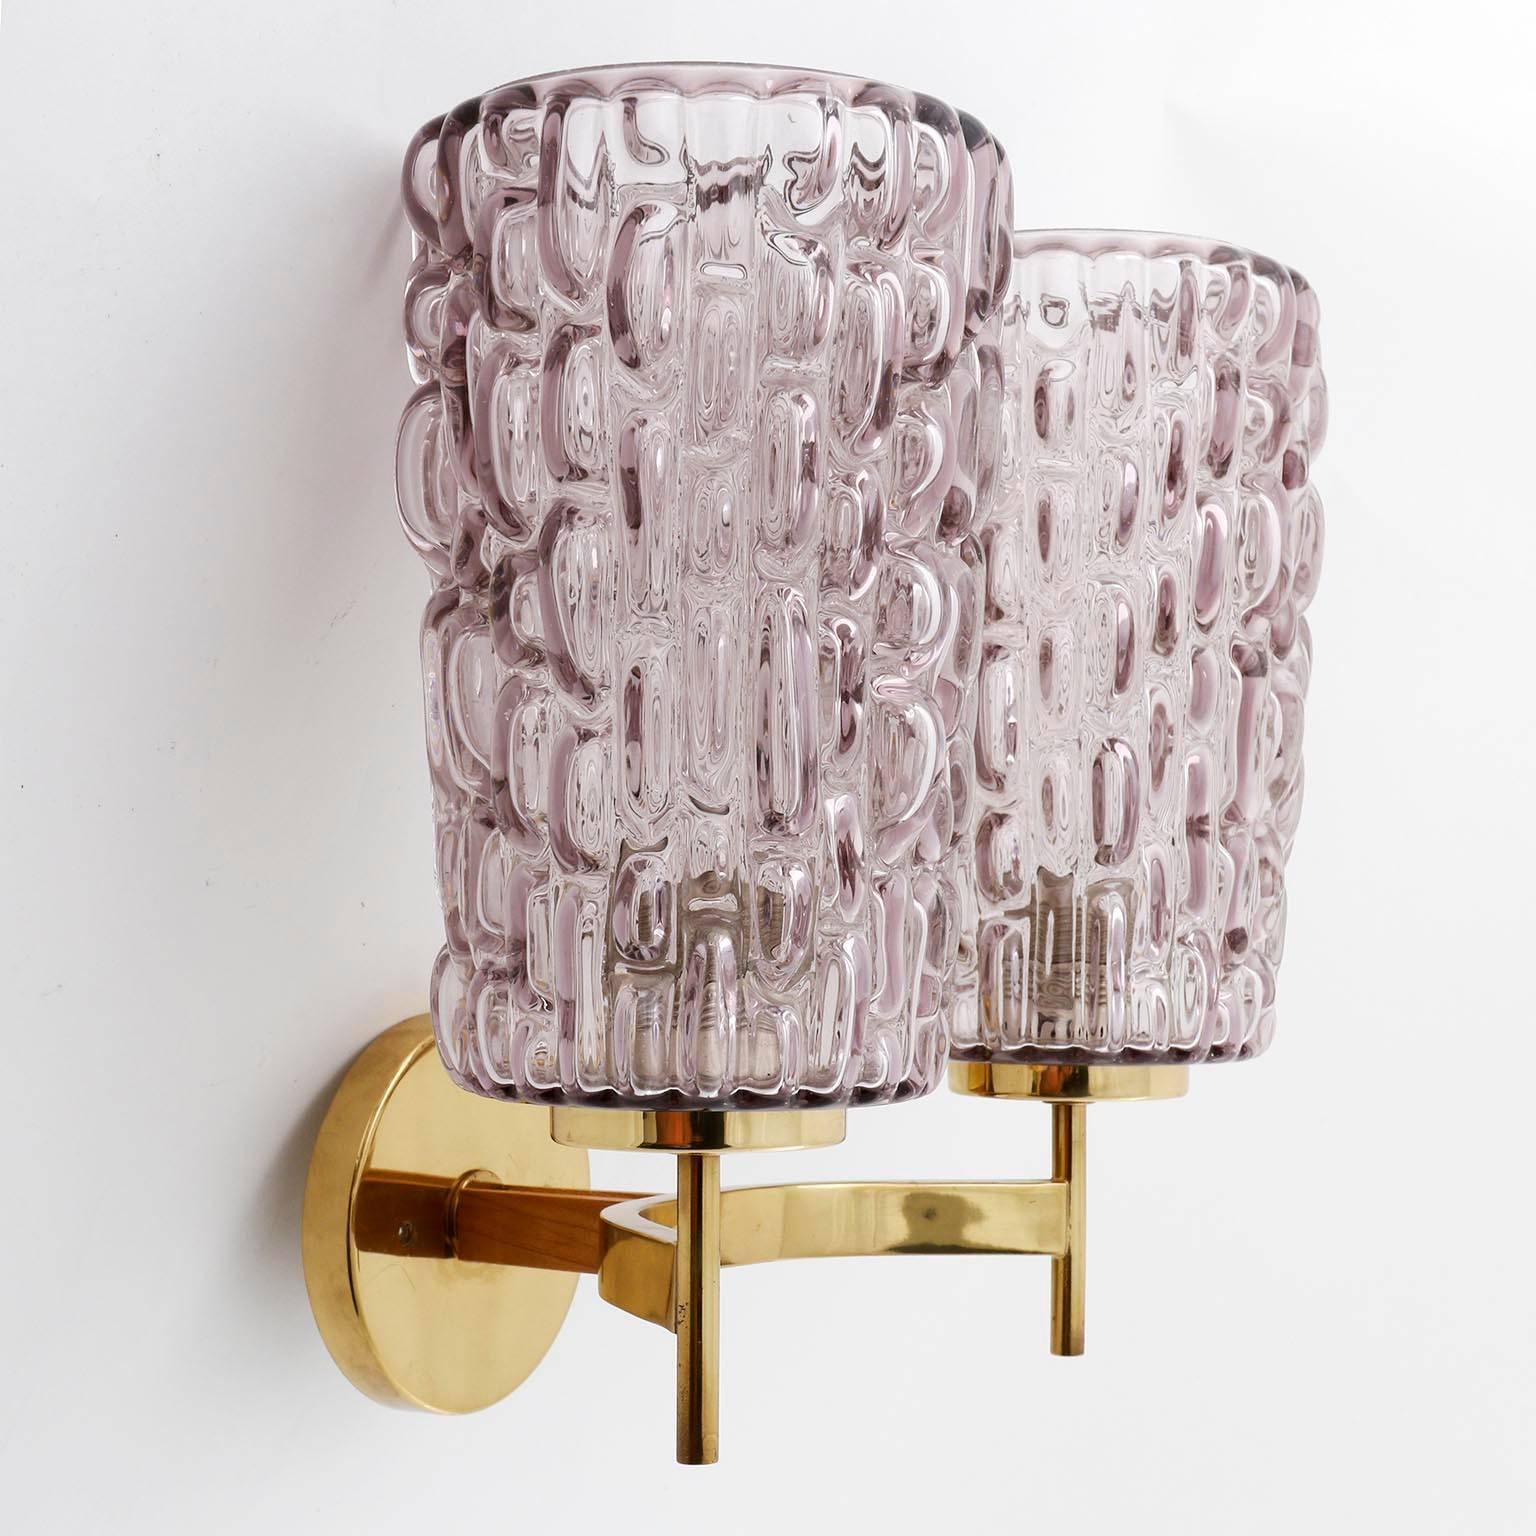 Polished Sconces Wall Lights by Rupert Nikoll, Violet Textured Glass Brass, Vienna, 1950s